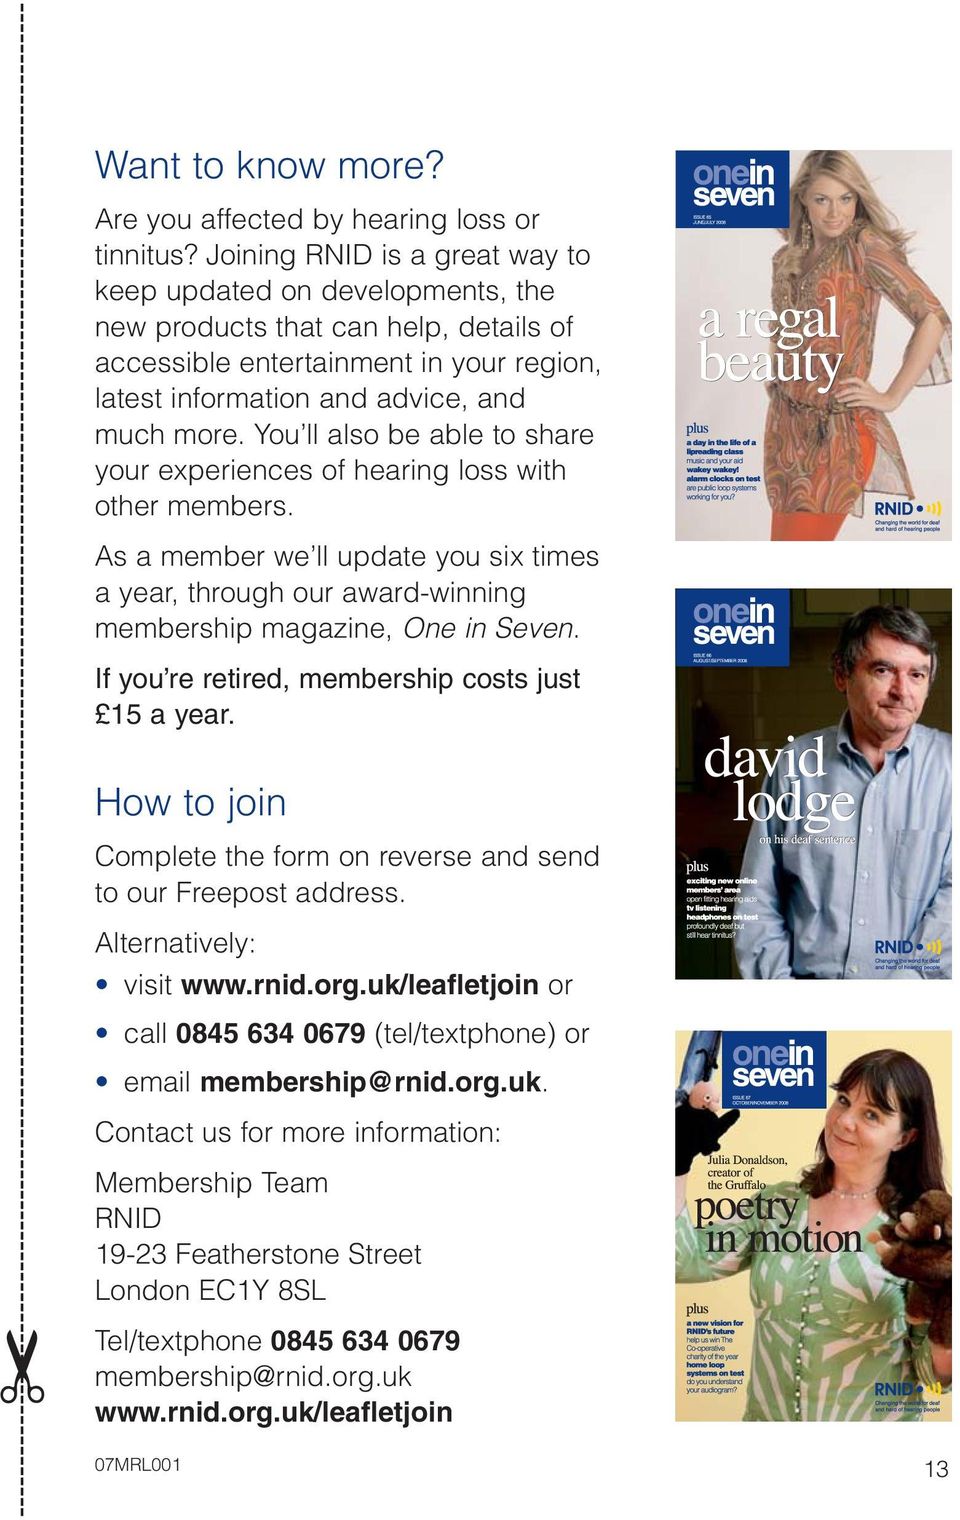 You ll also be able to share your experiences of hearing loss with other members. As a member we ll update you six times a year, through our award-winning membership magazine, One in Seven.